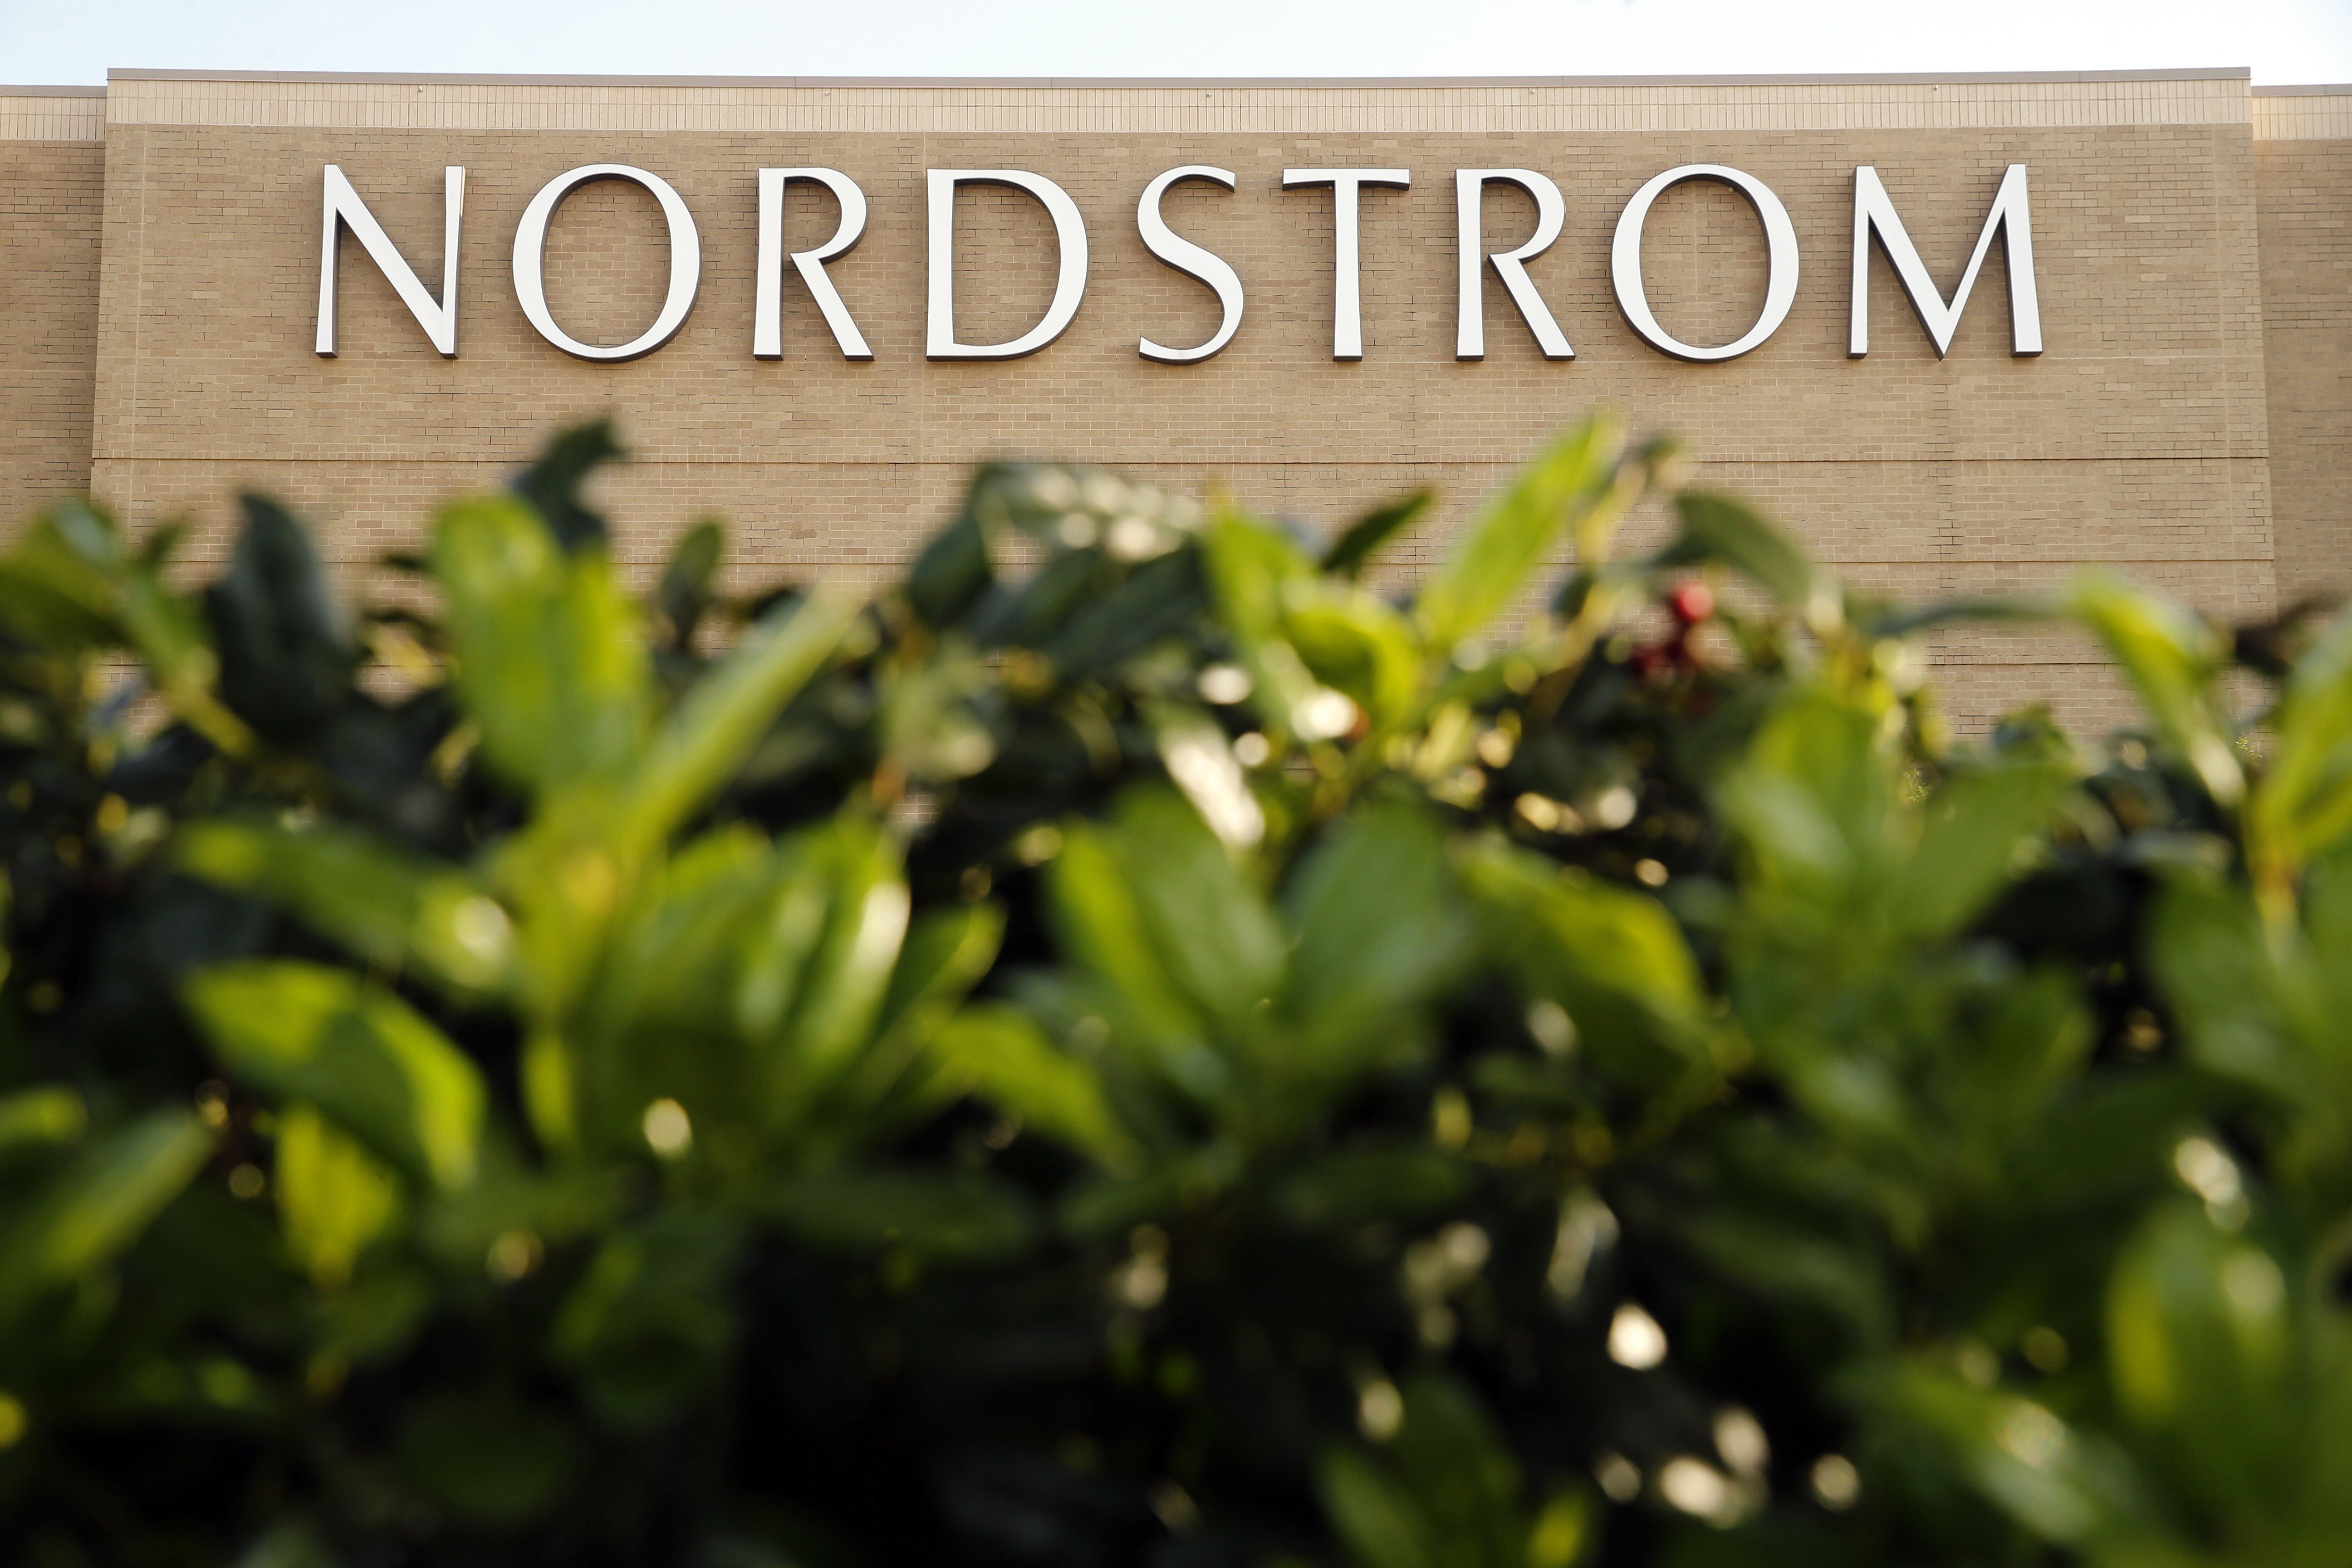 Nordstrom S Permanent Store Closings Include At Least One In Texas